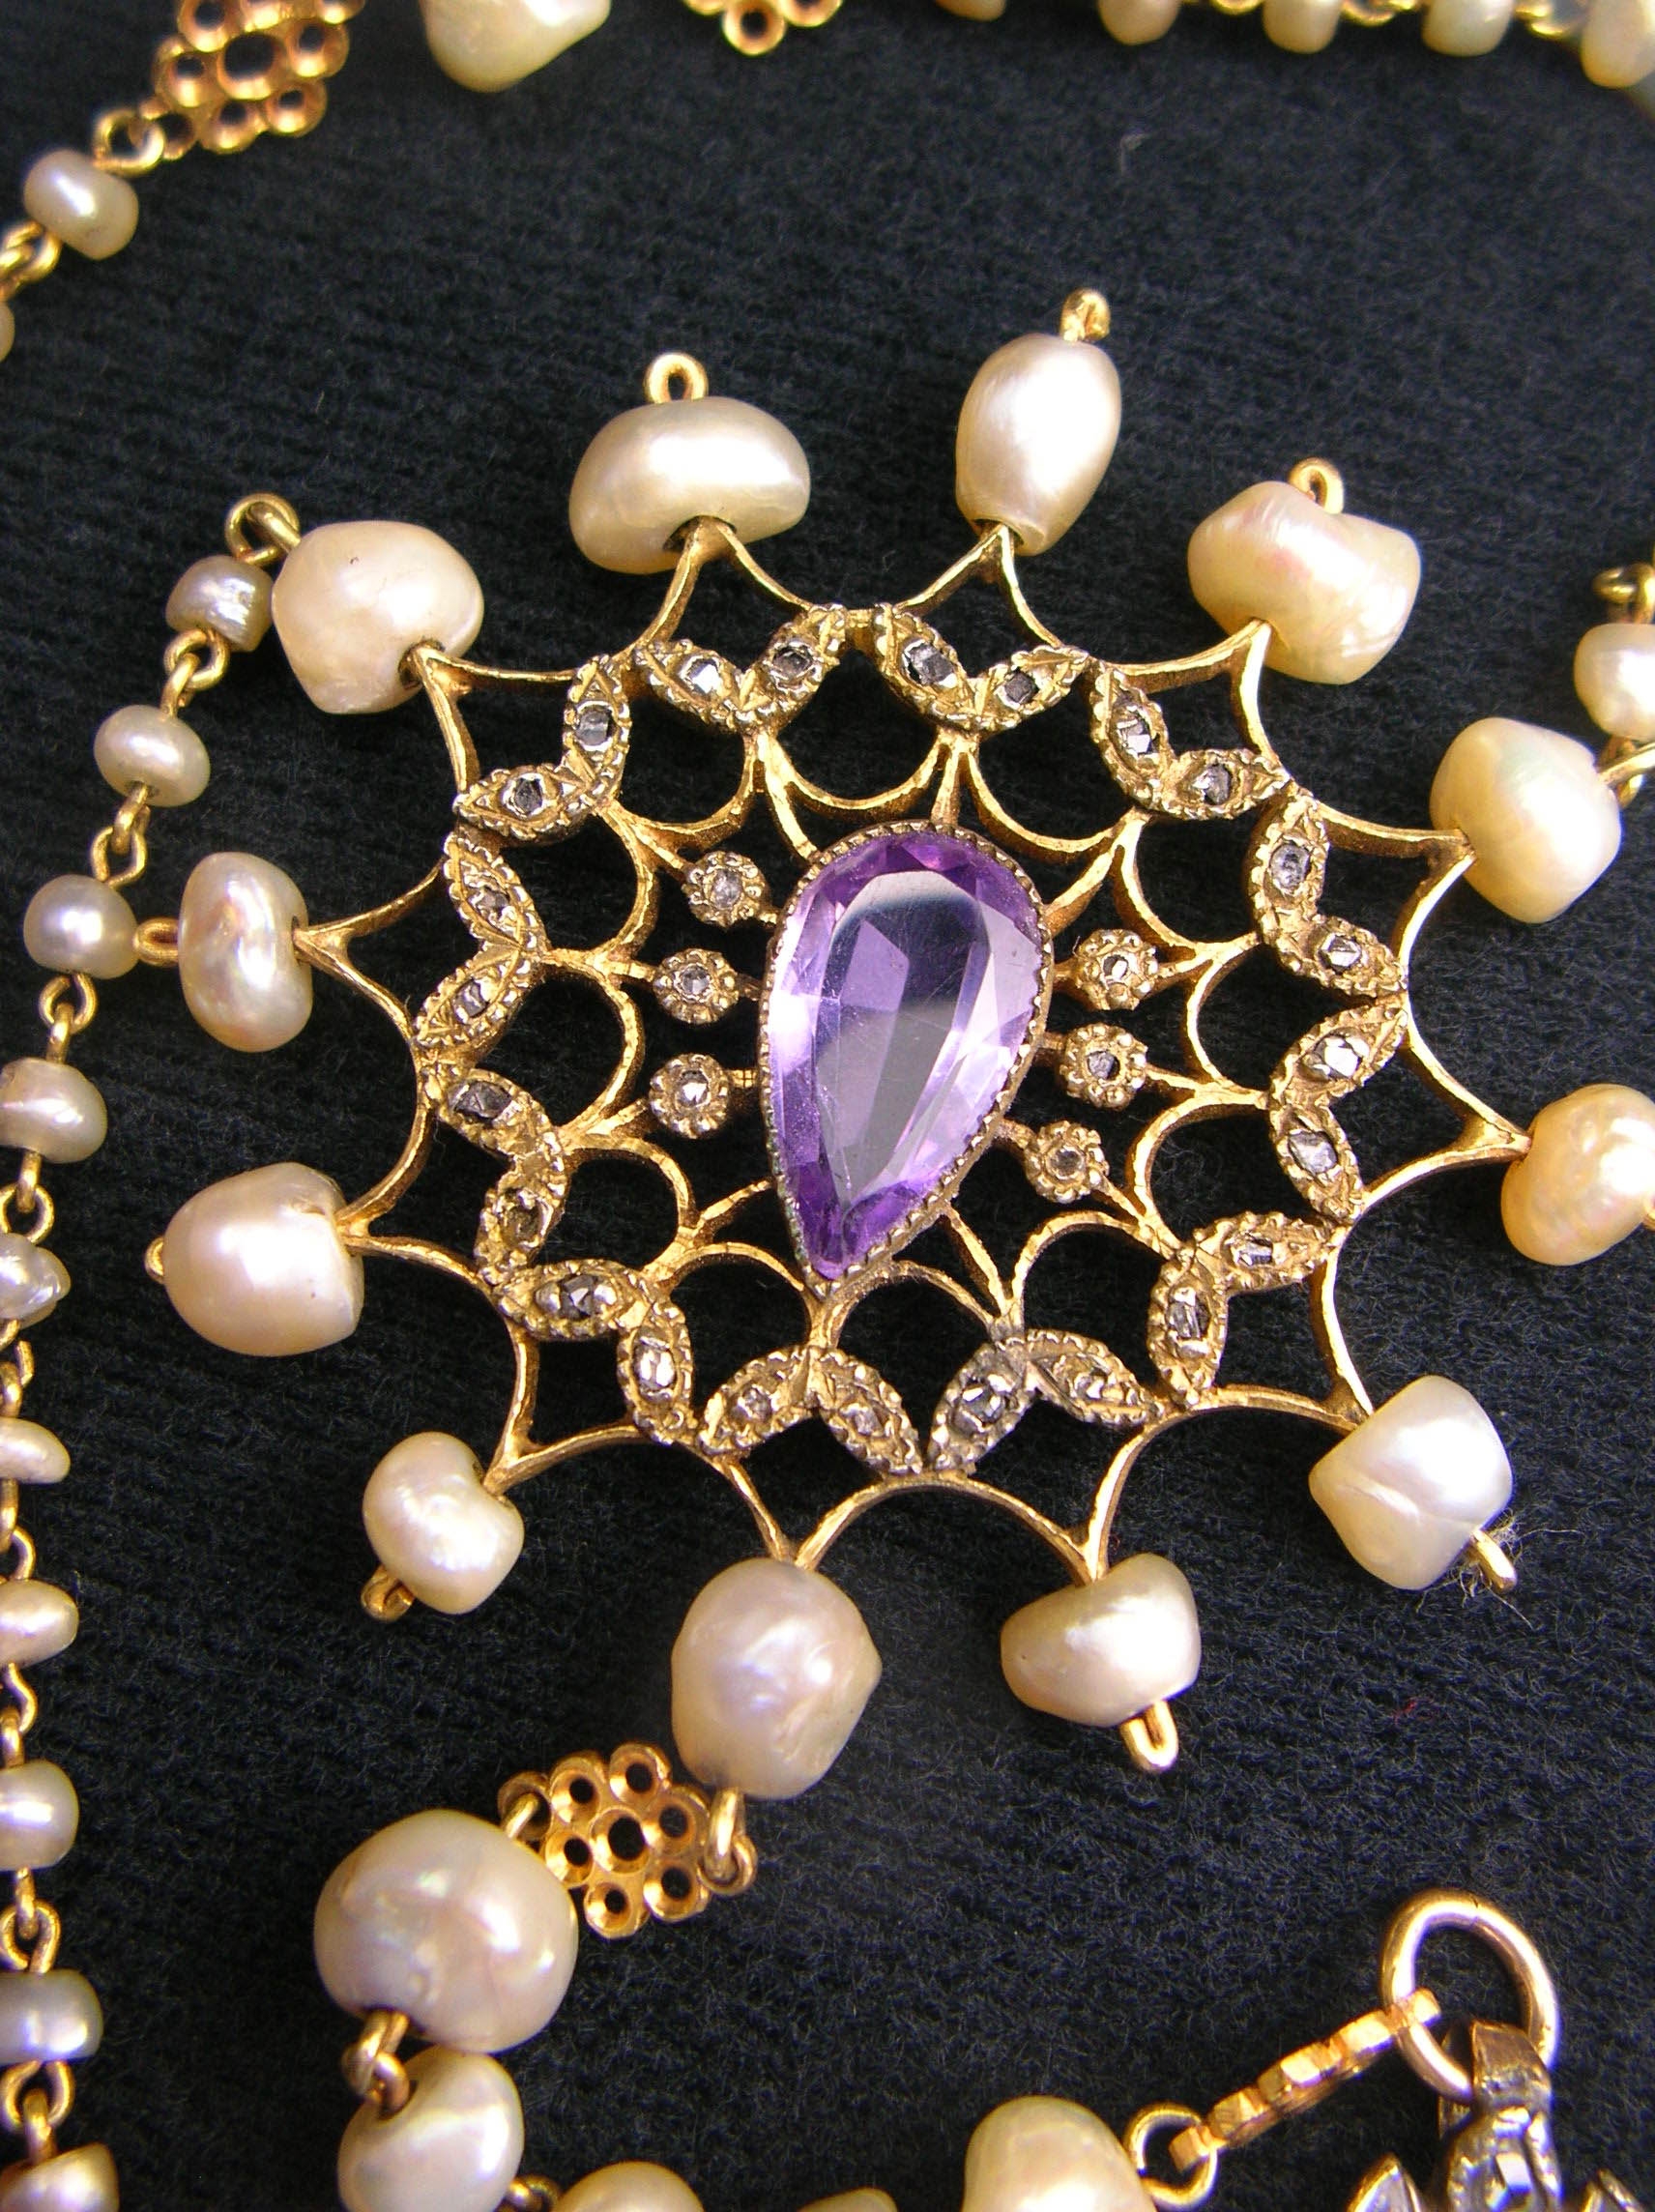 ROSARY CENTER: obverse gold, amethyst, pearls